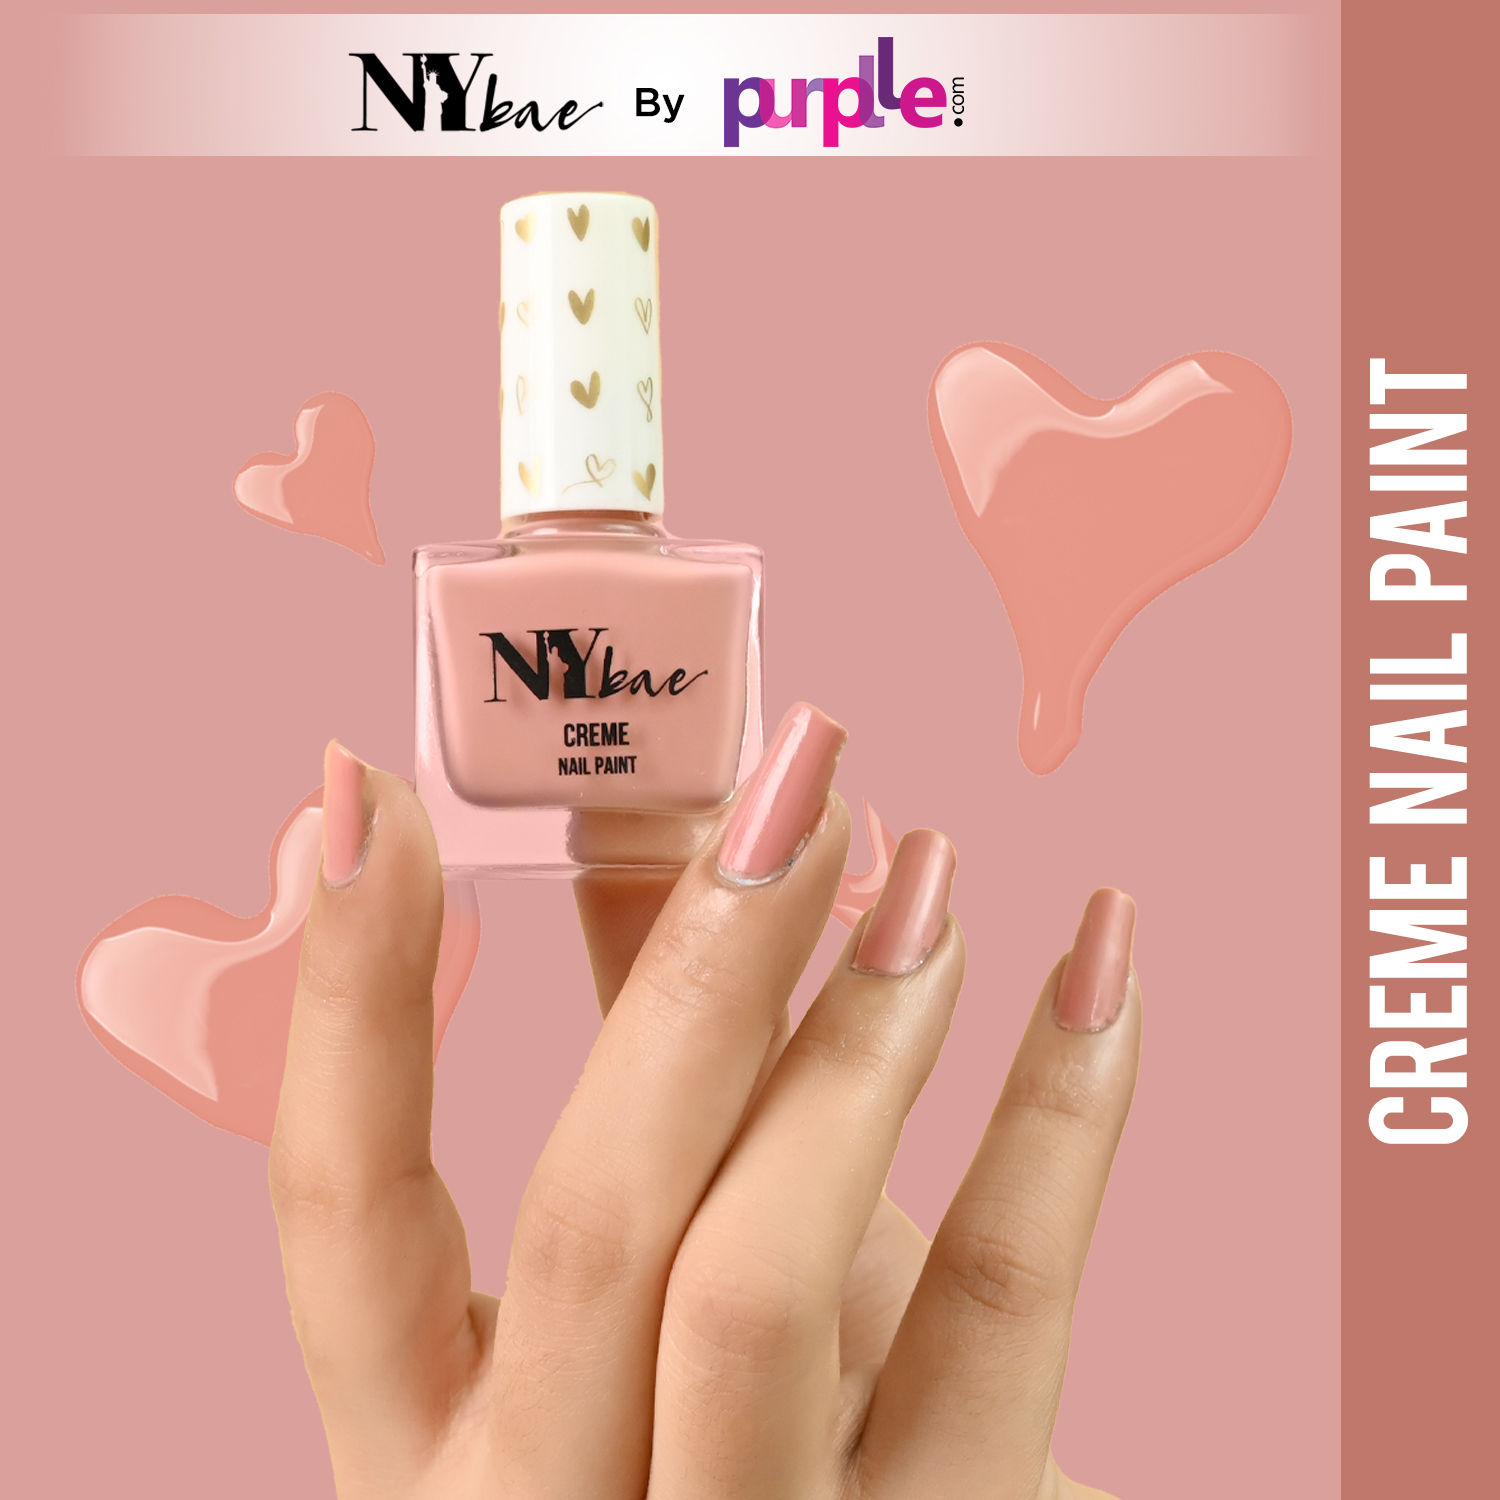 NY bae Matte Creme Nail Polish Combo (Set of 3) Pink,, Purple, Red - Price  in India, Buy NY bae Matte Creme Nail Polish Combo (Set of 3) Pink,,  Purple, Red Online